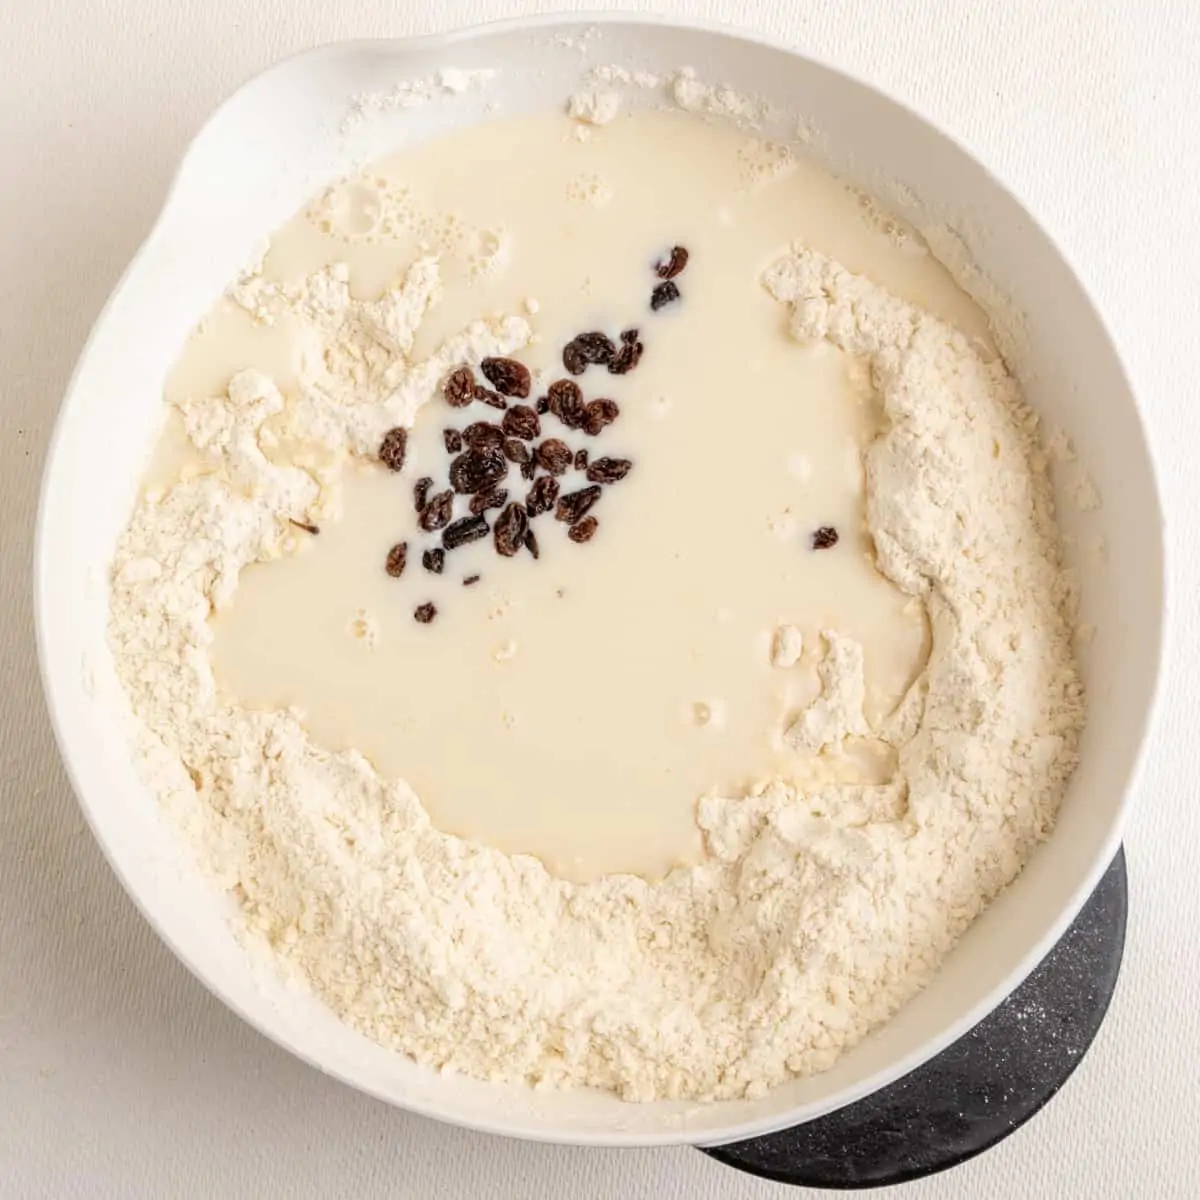 Soy milk and raisins are added into the mixing bowl to the other ingredients, and a dough is mixed.